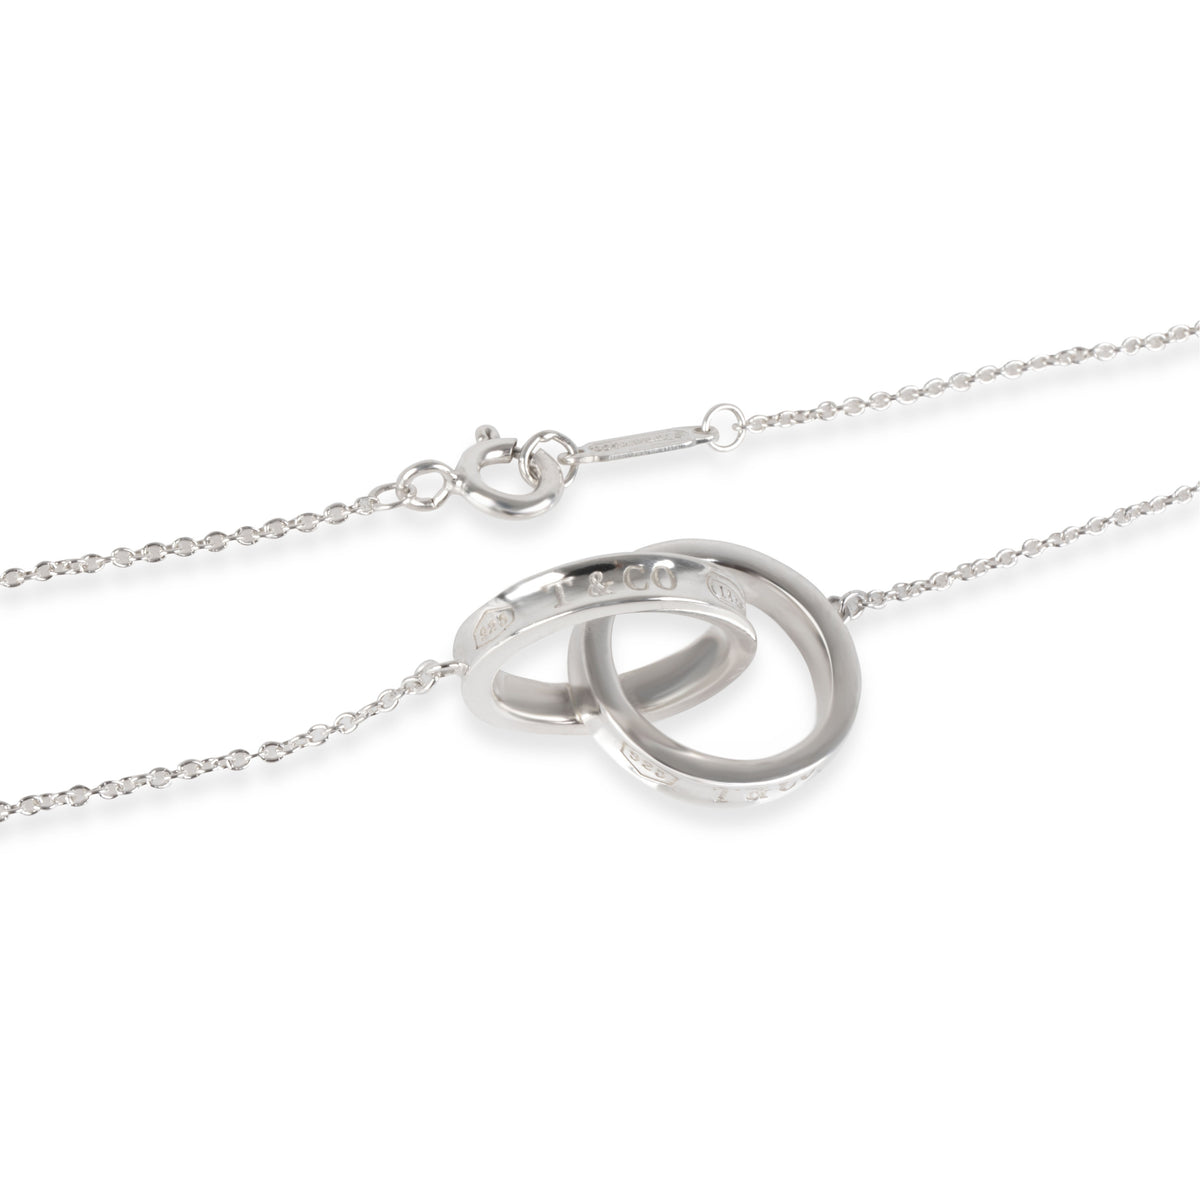 Tiffany & Co. 1837 Interlocking Circles  Necklace in  Sterling Silver